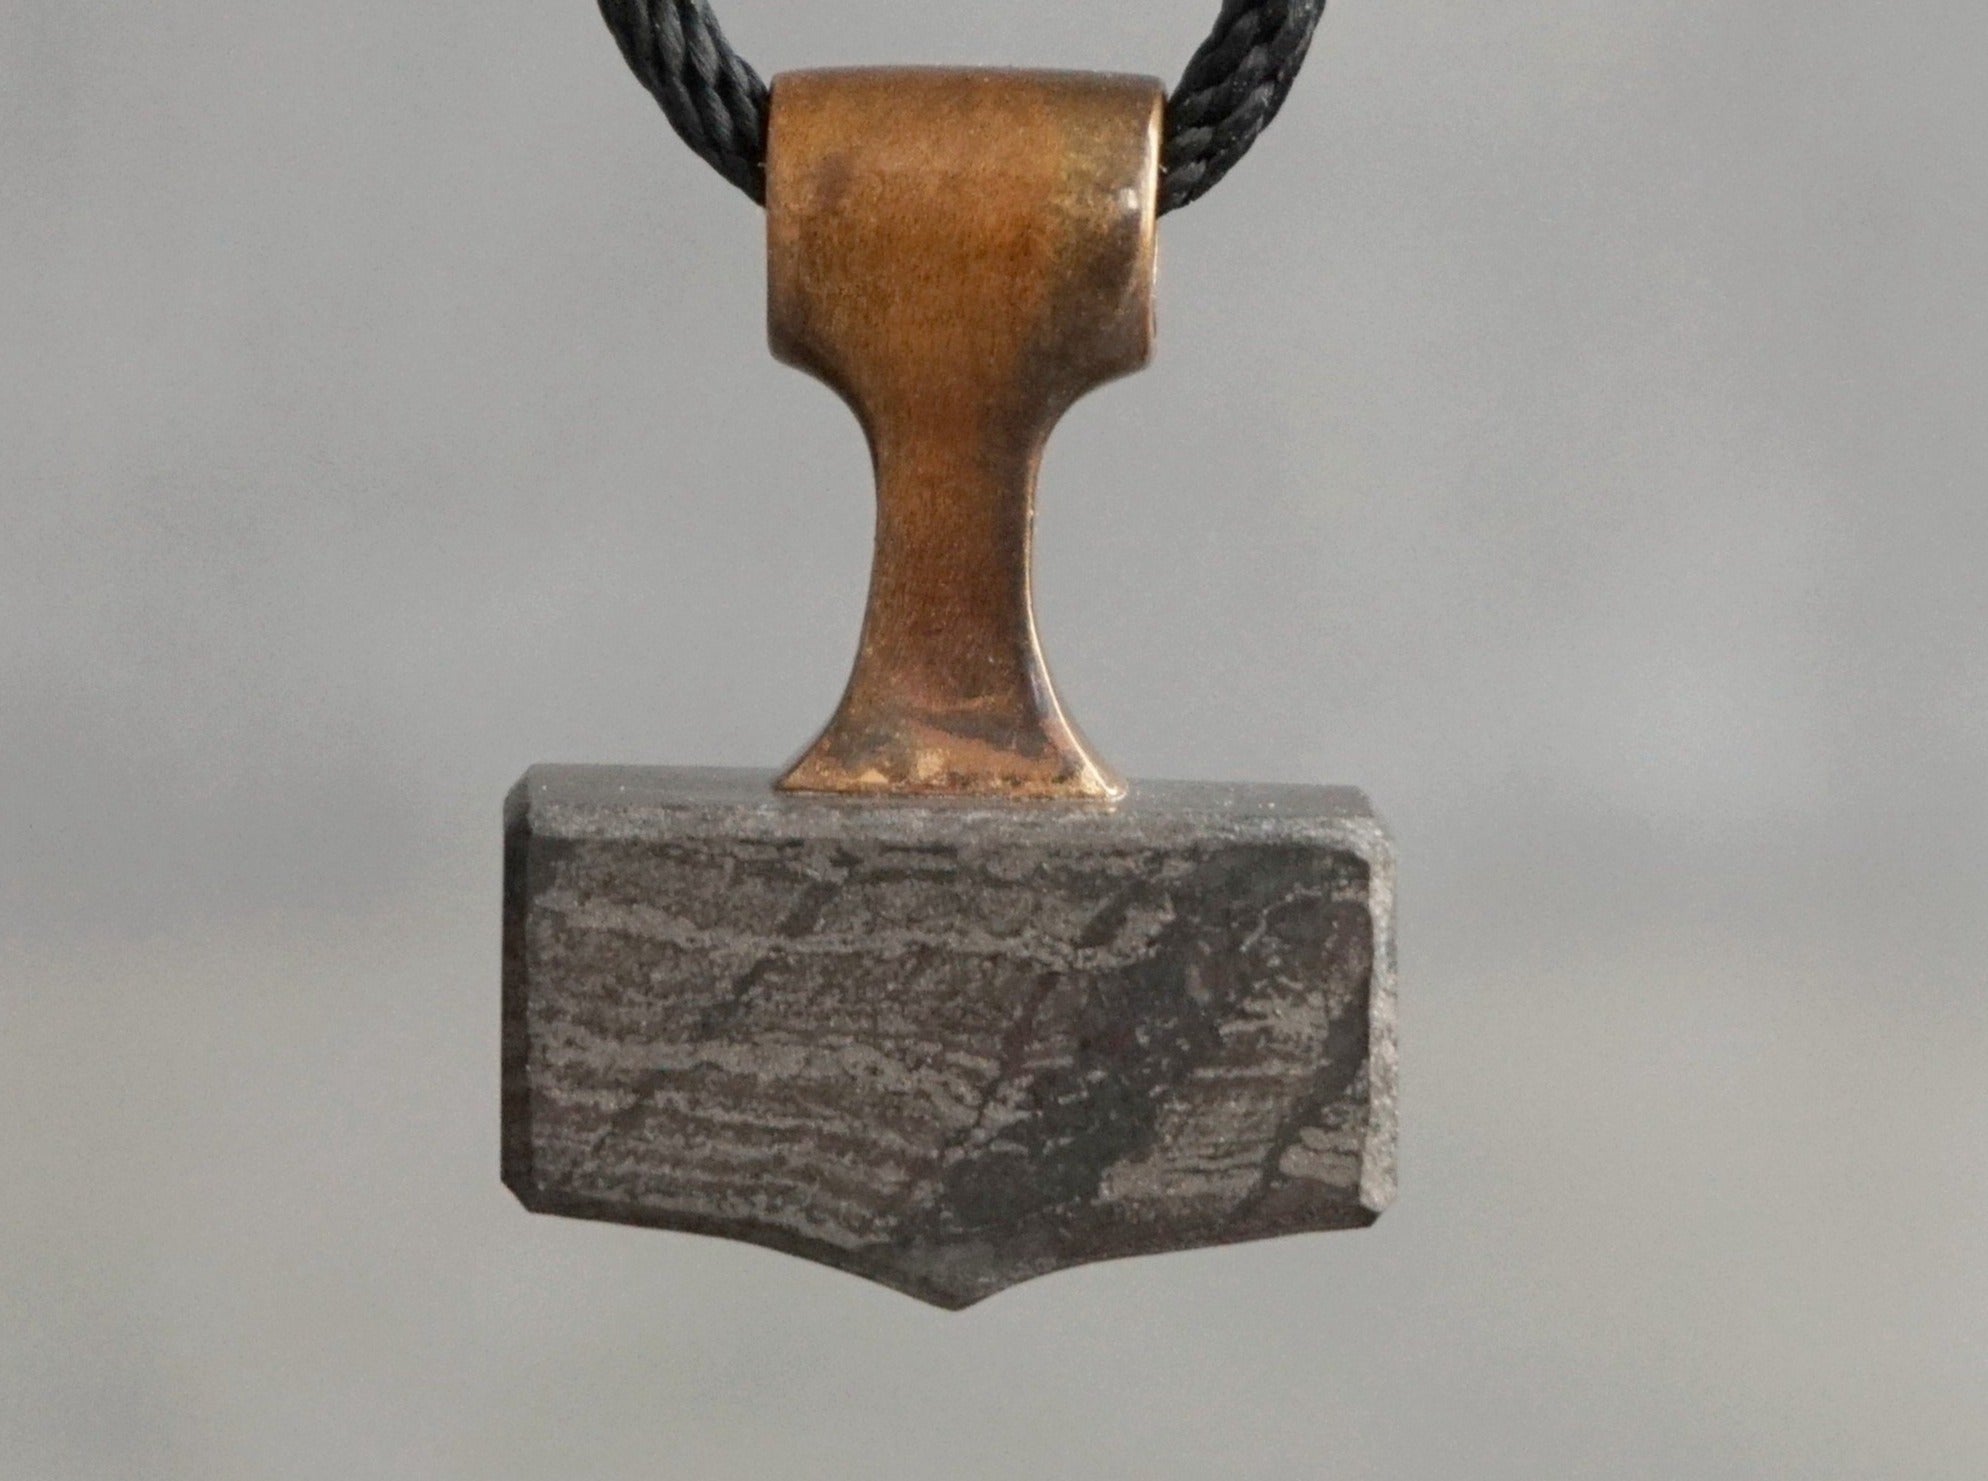 small hammer pendant made of bronze and grey stone